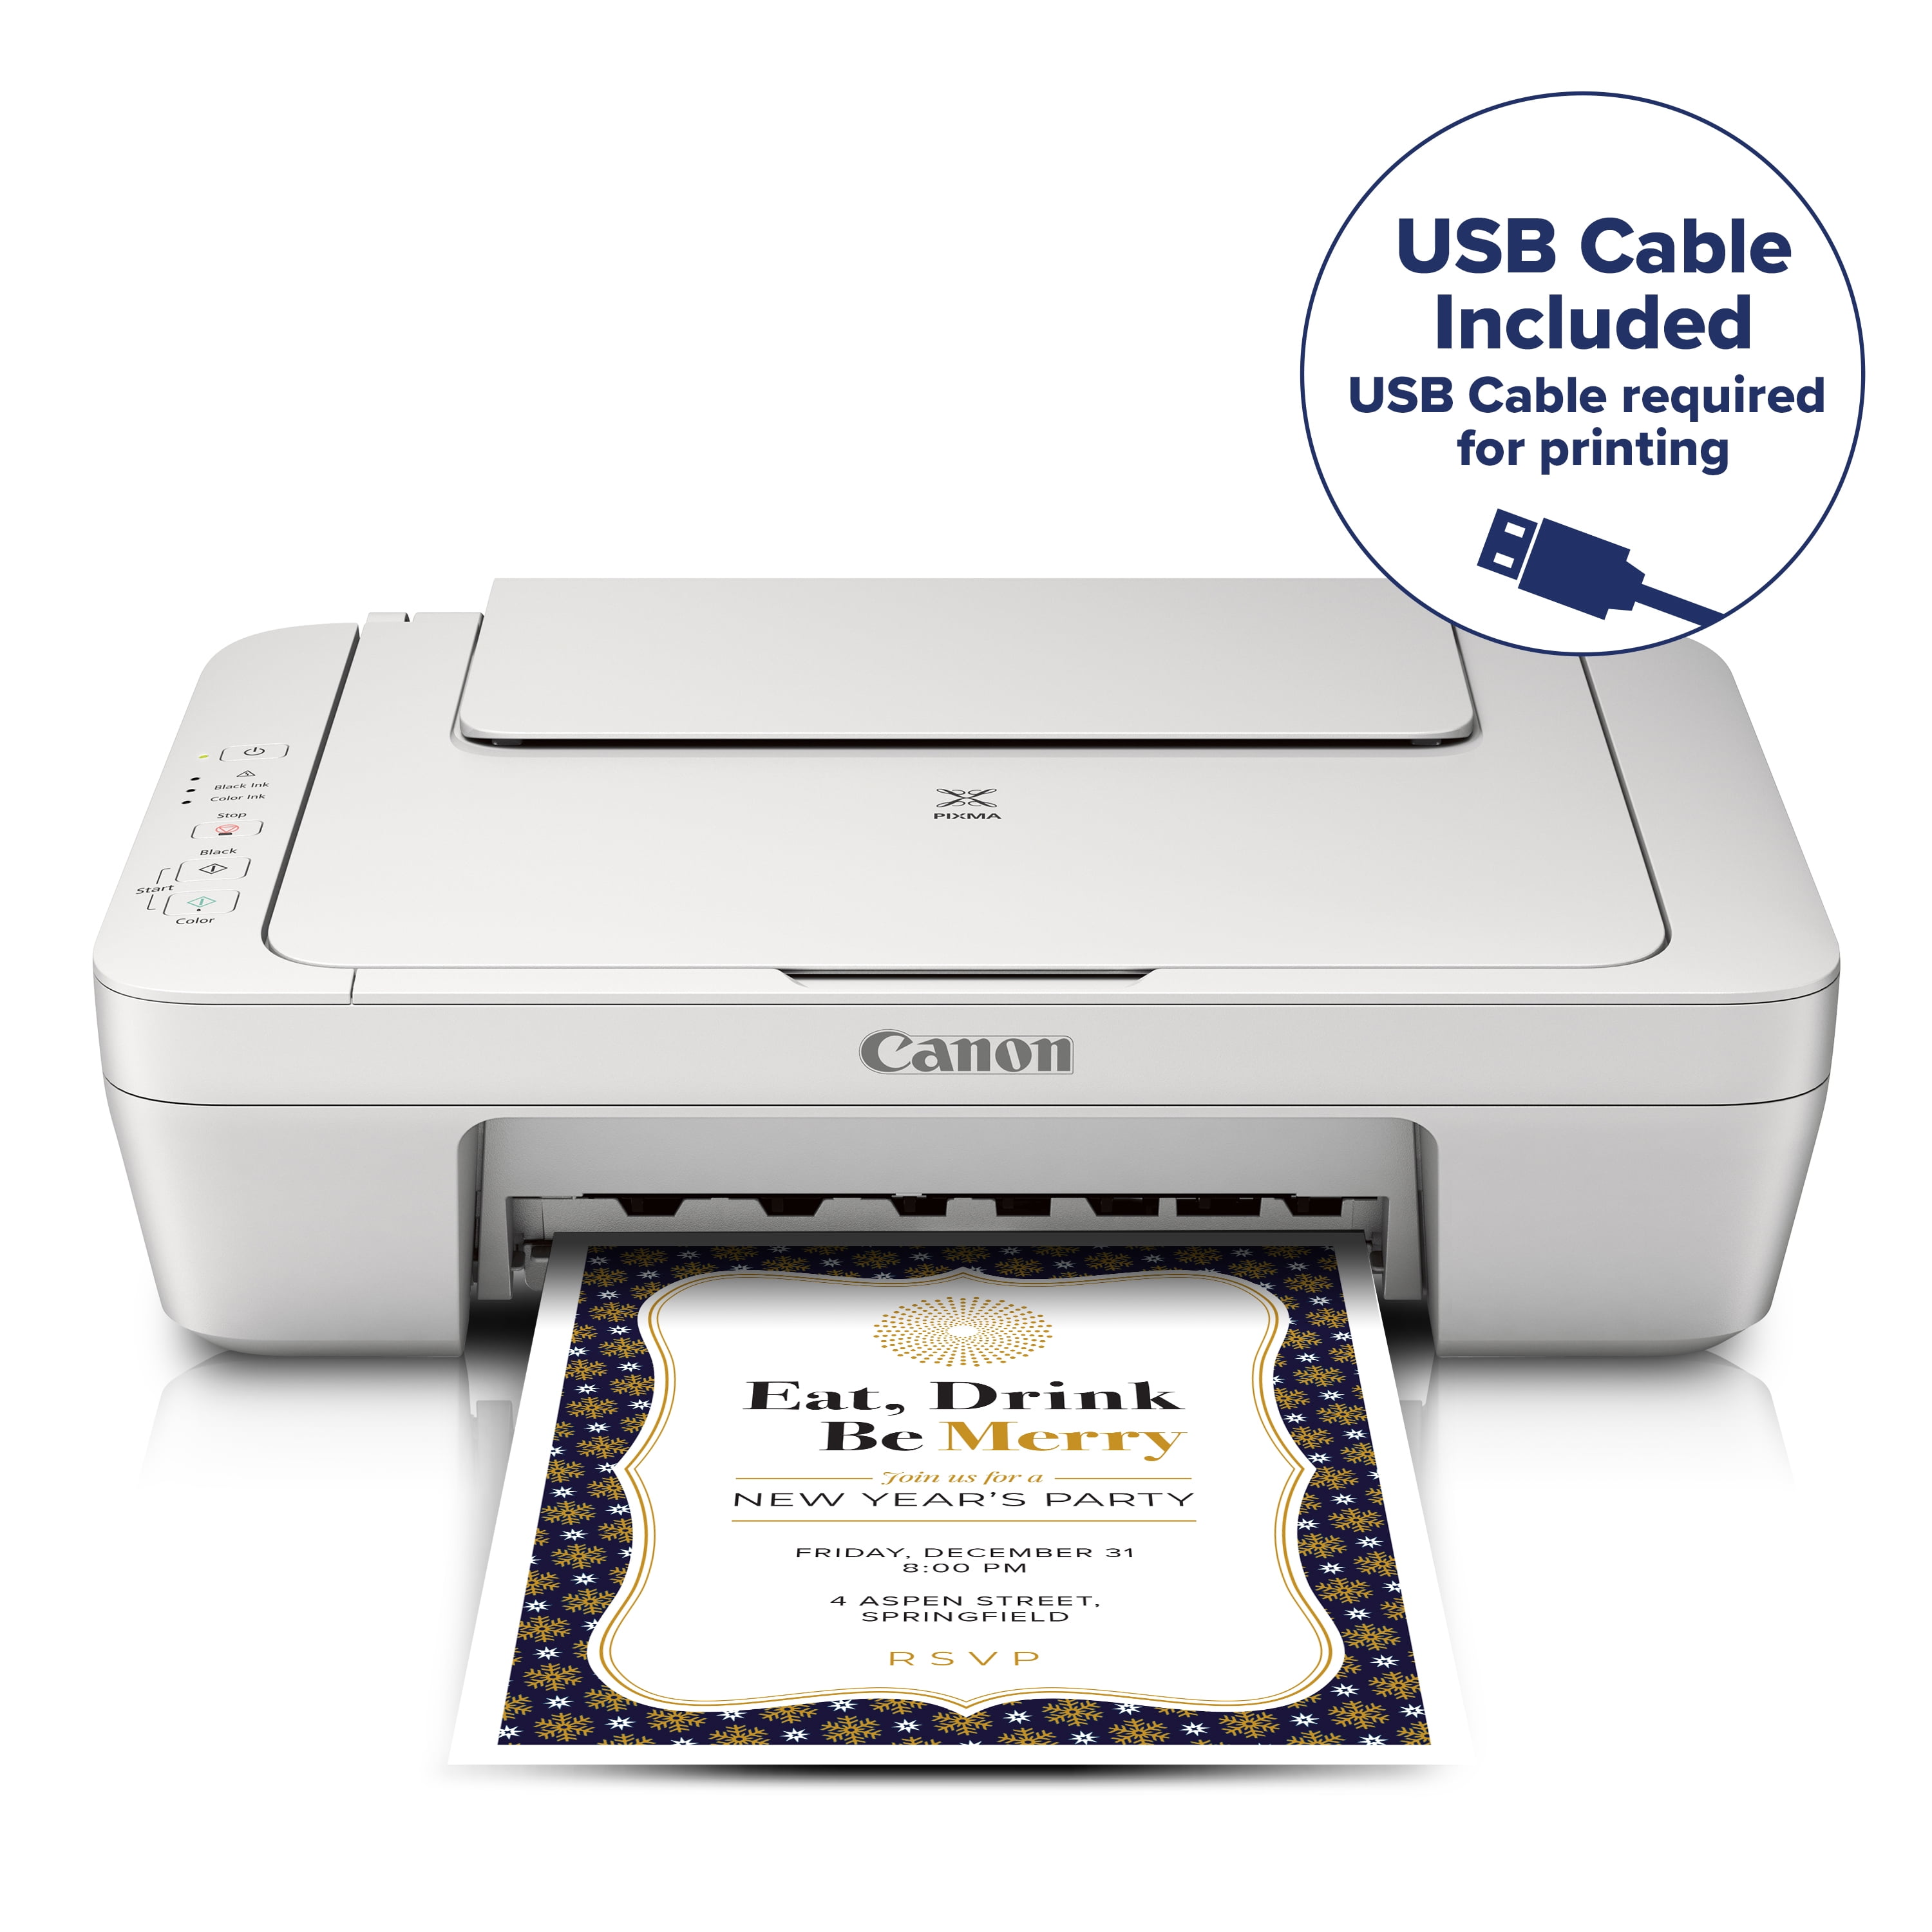 Canon PIXMA MG2522 Wired All-in-One Color Inkjet Printer [USB cable included], White